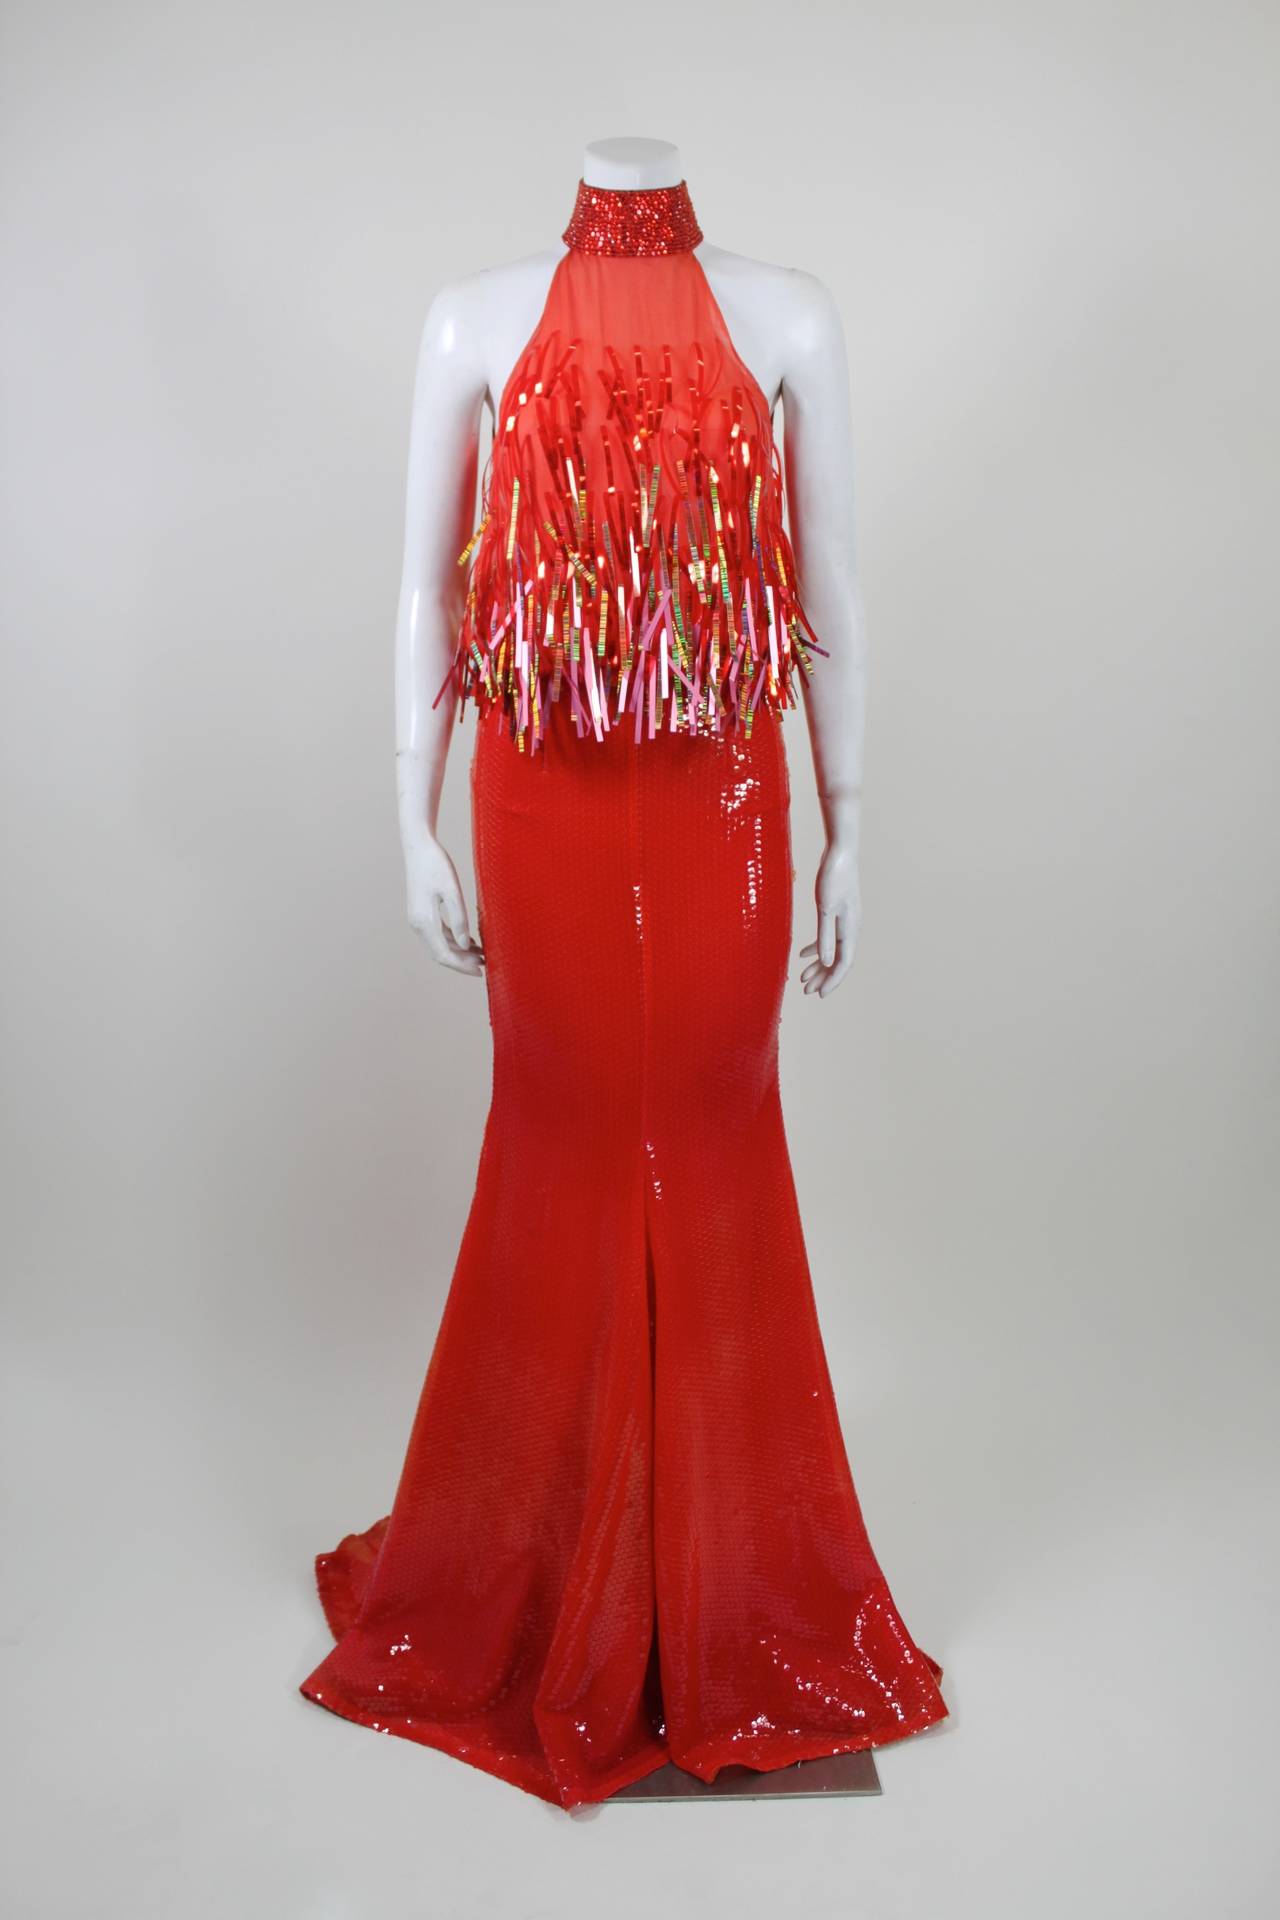 This 1990s evening gown is stunning on more than one level: it features gorgeous red and orange iridescent sequins throughout; the bodice is embellished with gorgeous, alternating color paillettes; and the silhouette is a halter with fitted mermaid